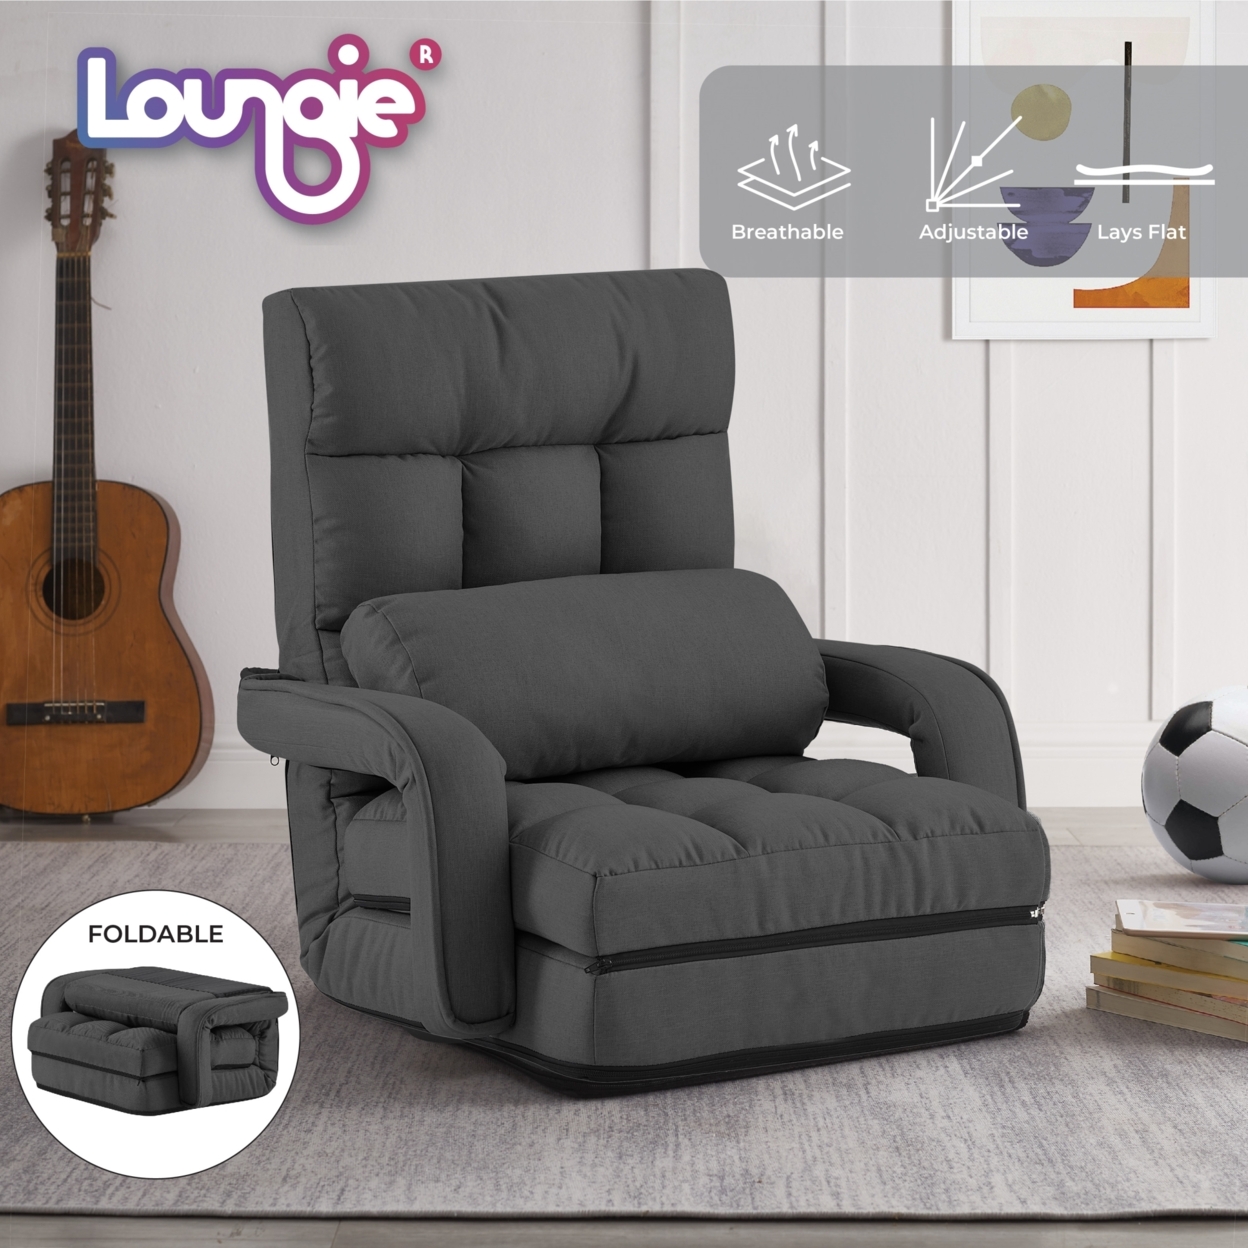 Nella Chair - 5 Adjustable Positions, Foldable, Back Support Pillow, Washable Cover, Steel Rod Construction - Dark Grey